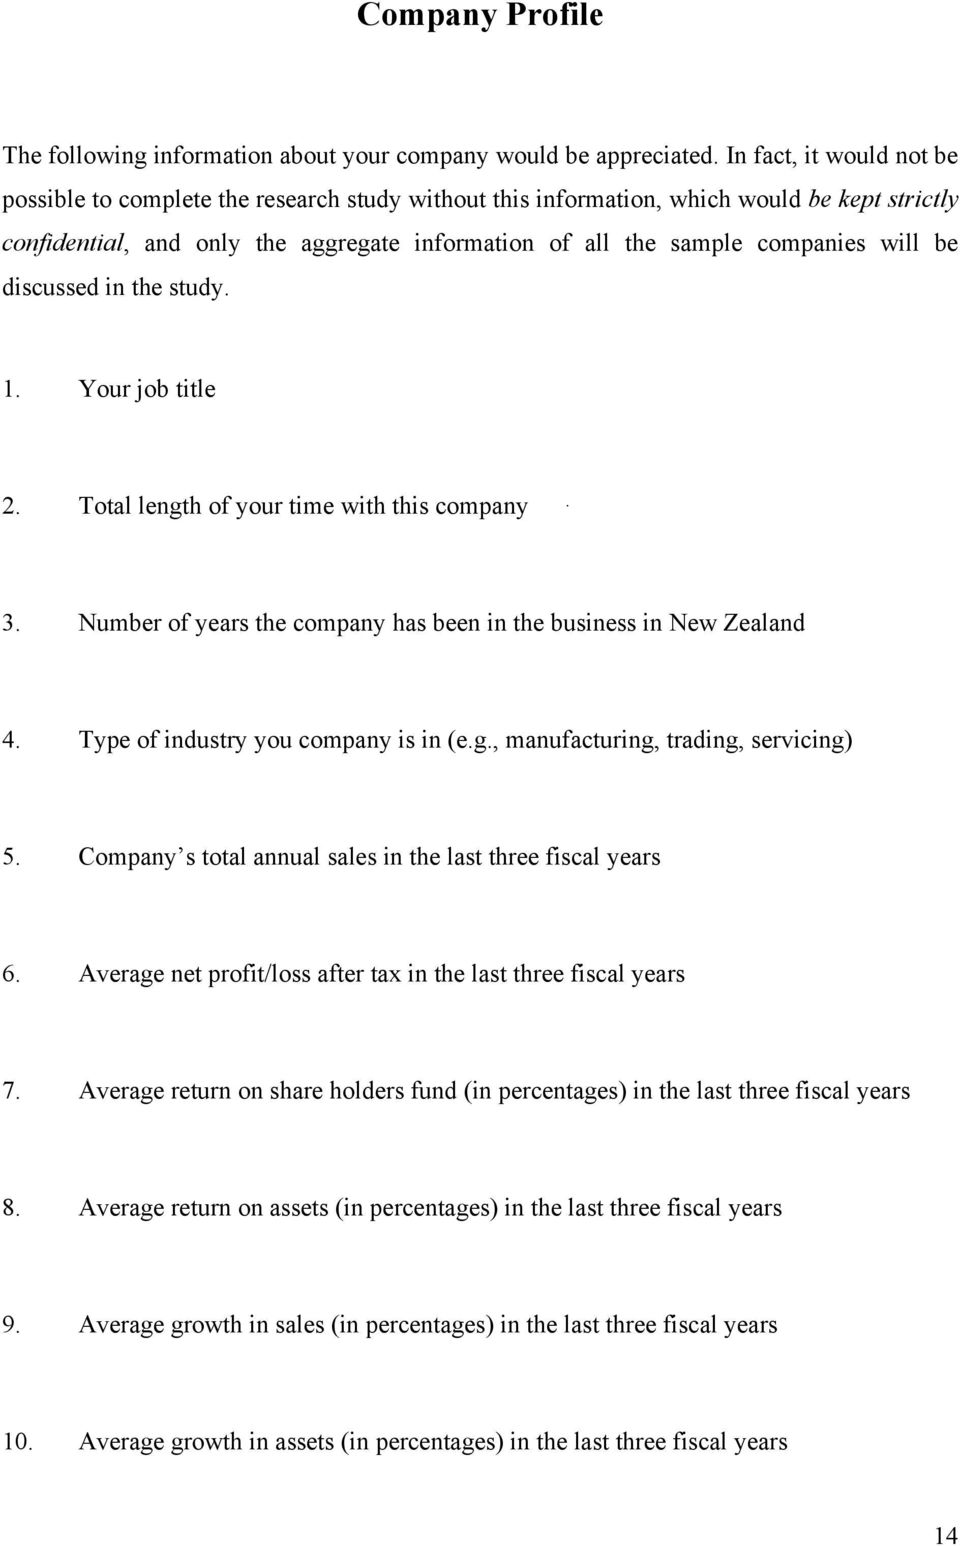 will be discussed in the study. 1. Your job title 2. Total length of your time with this company 3. Number of years the company has been in the business in New Zealand 4.